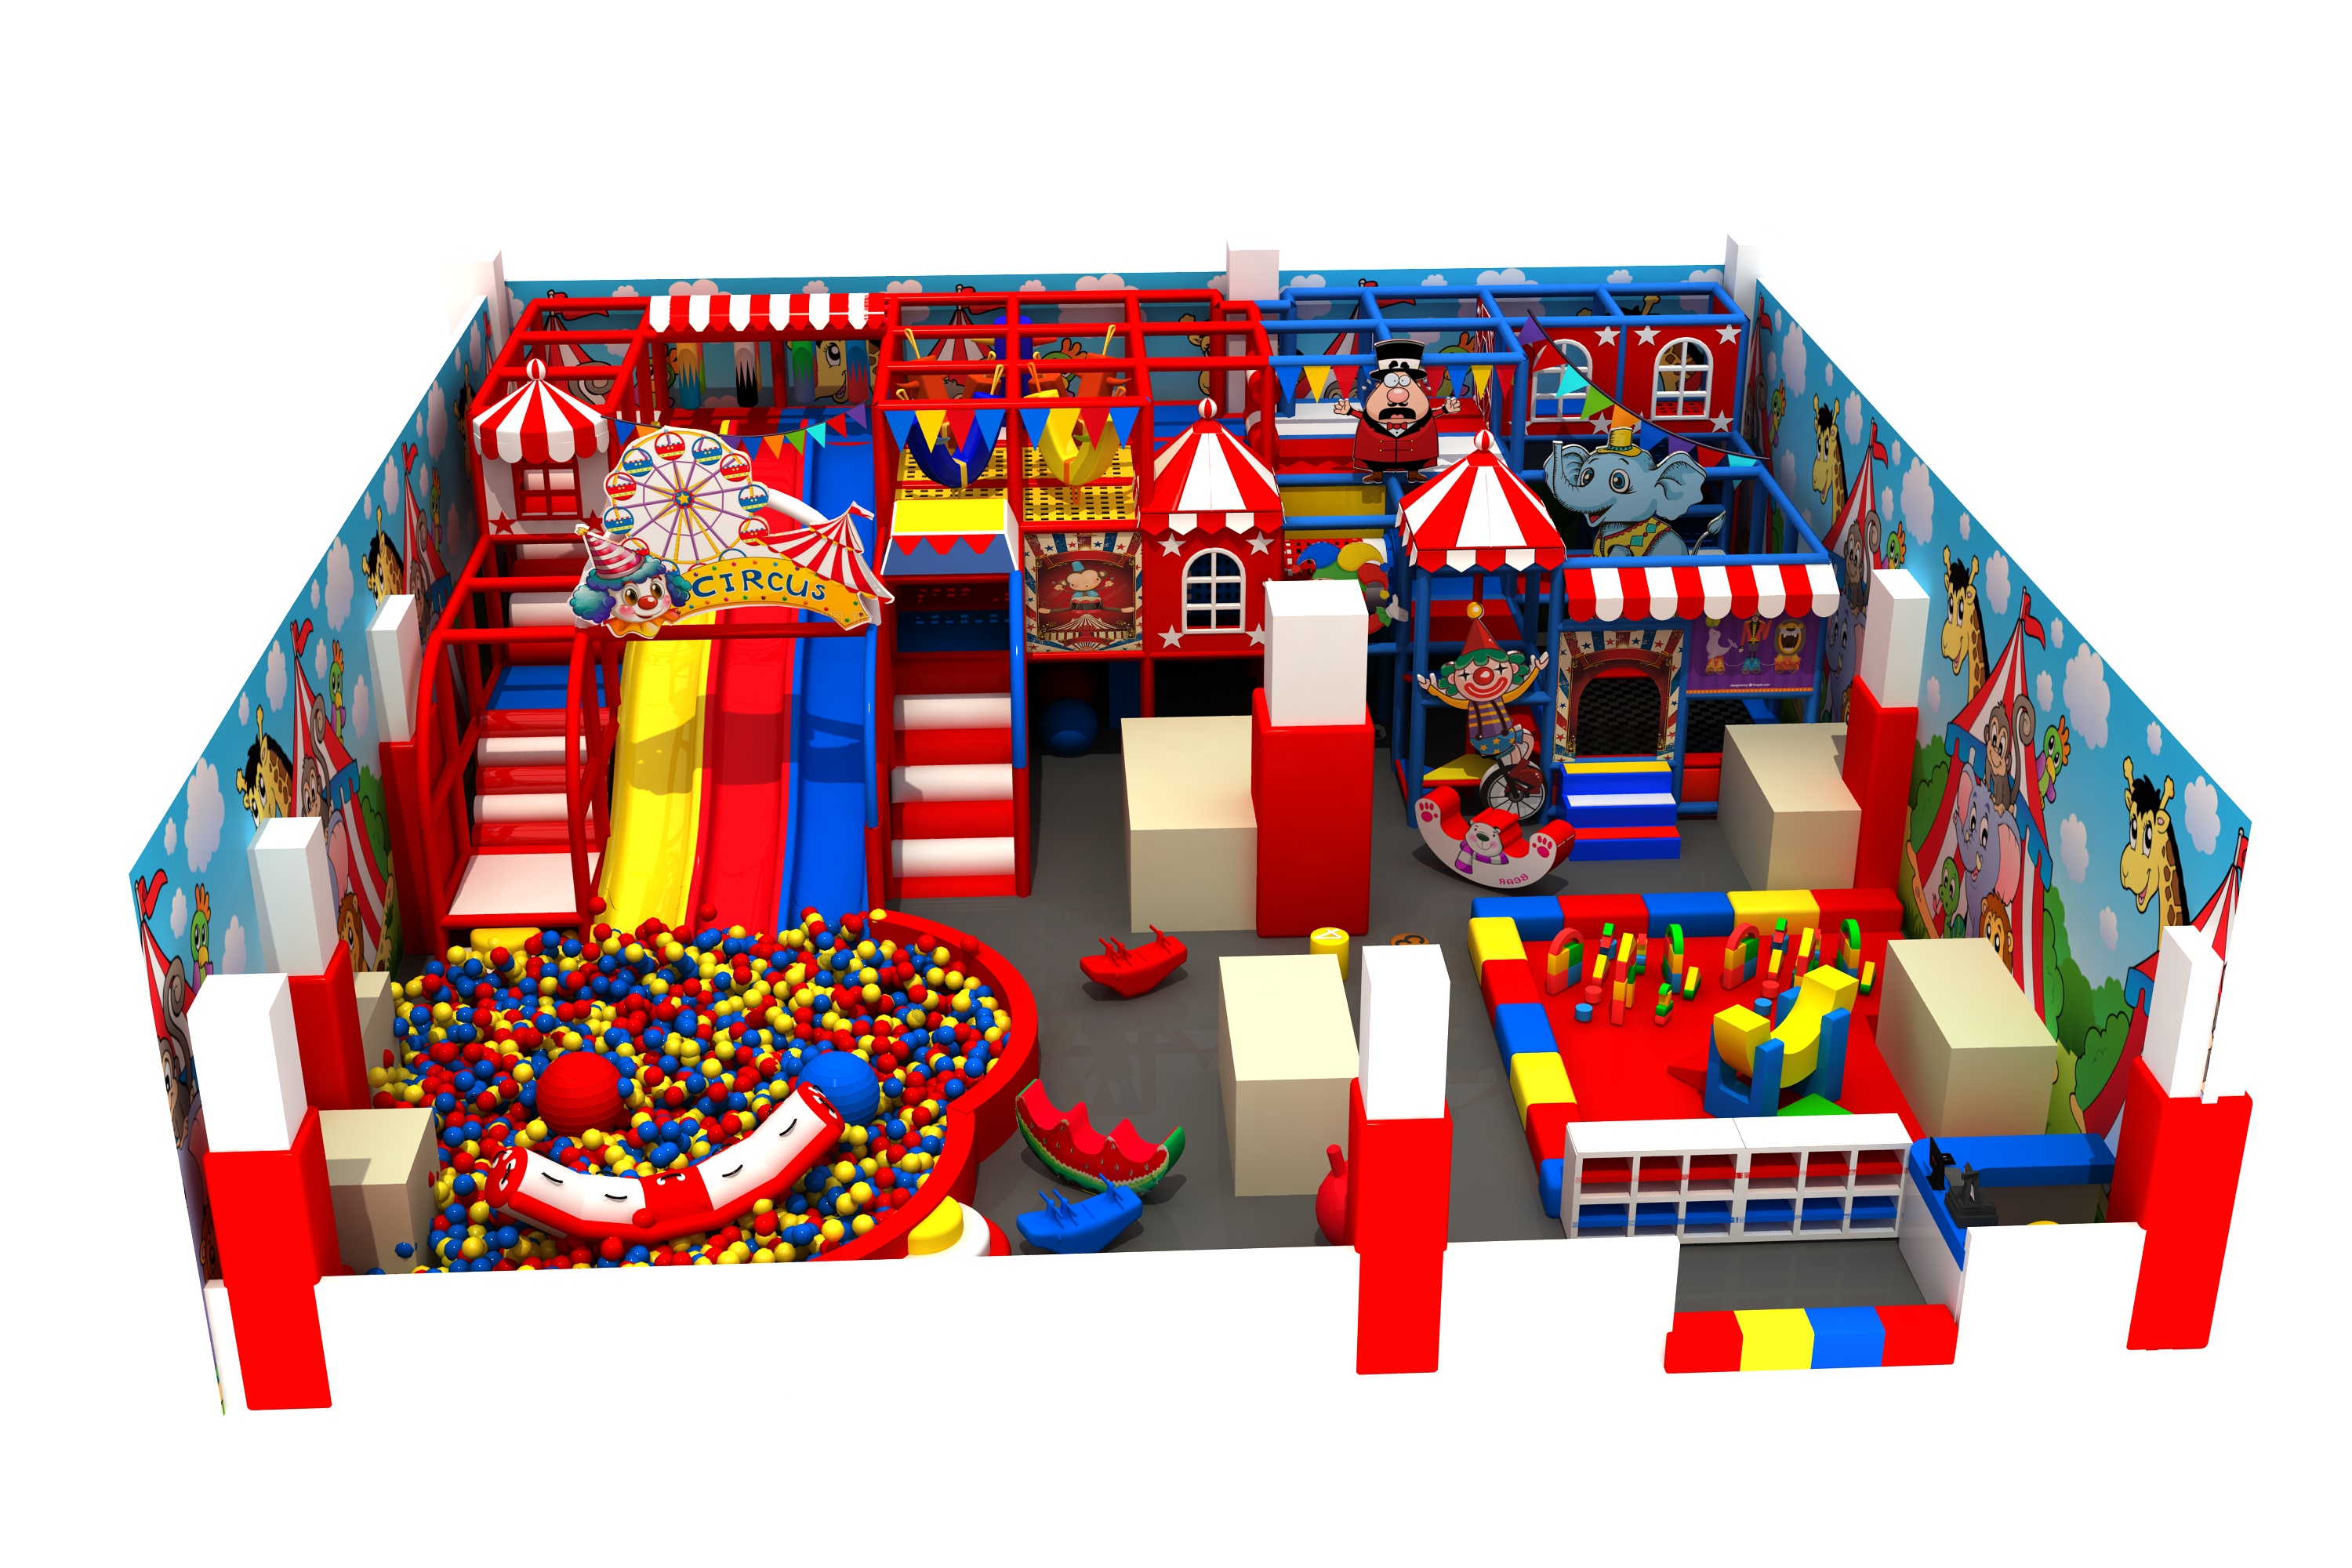 Interactive Candy Theme Indoor Playground for Pre-school